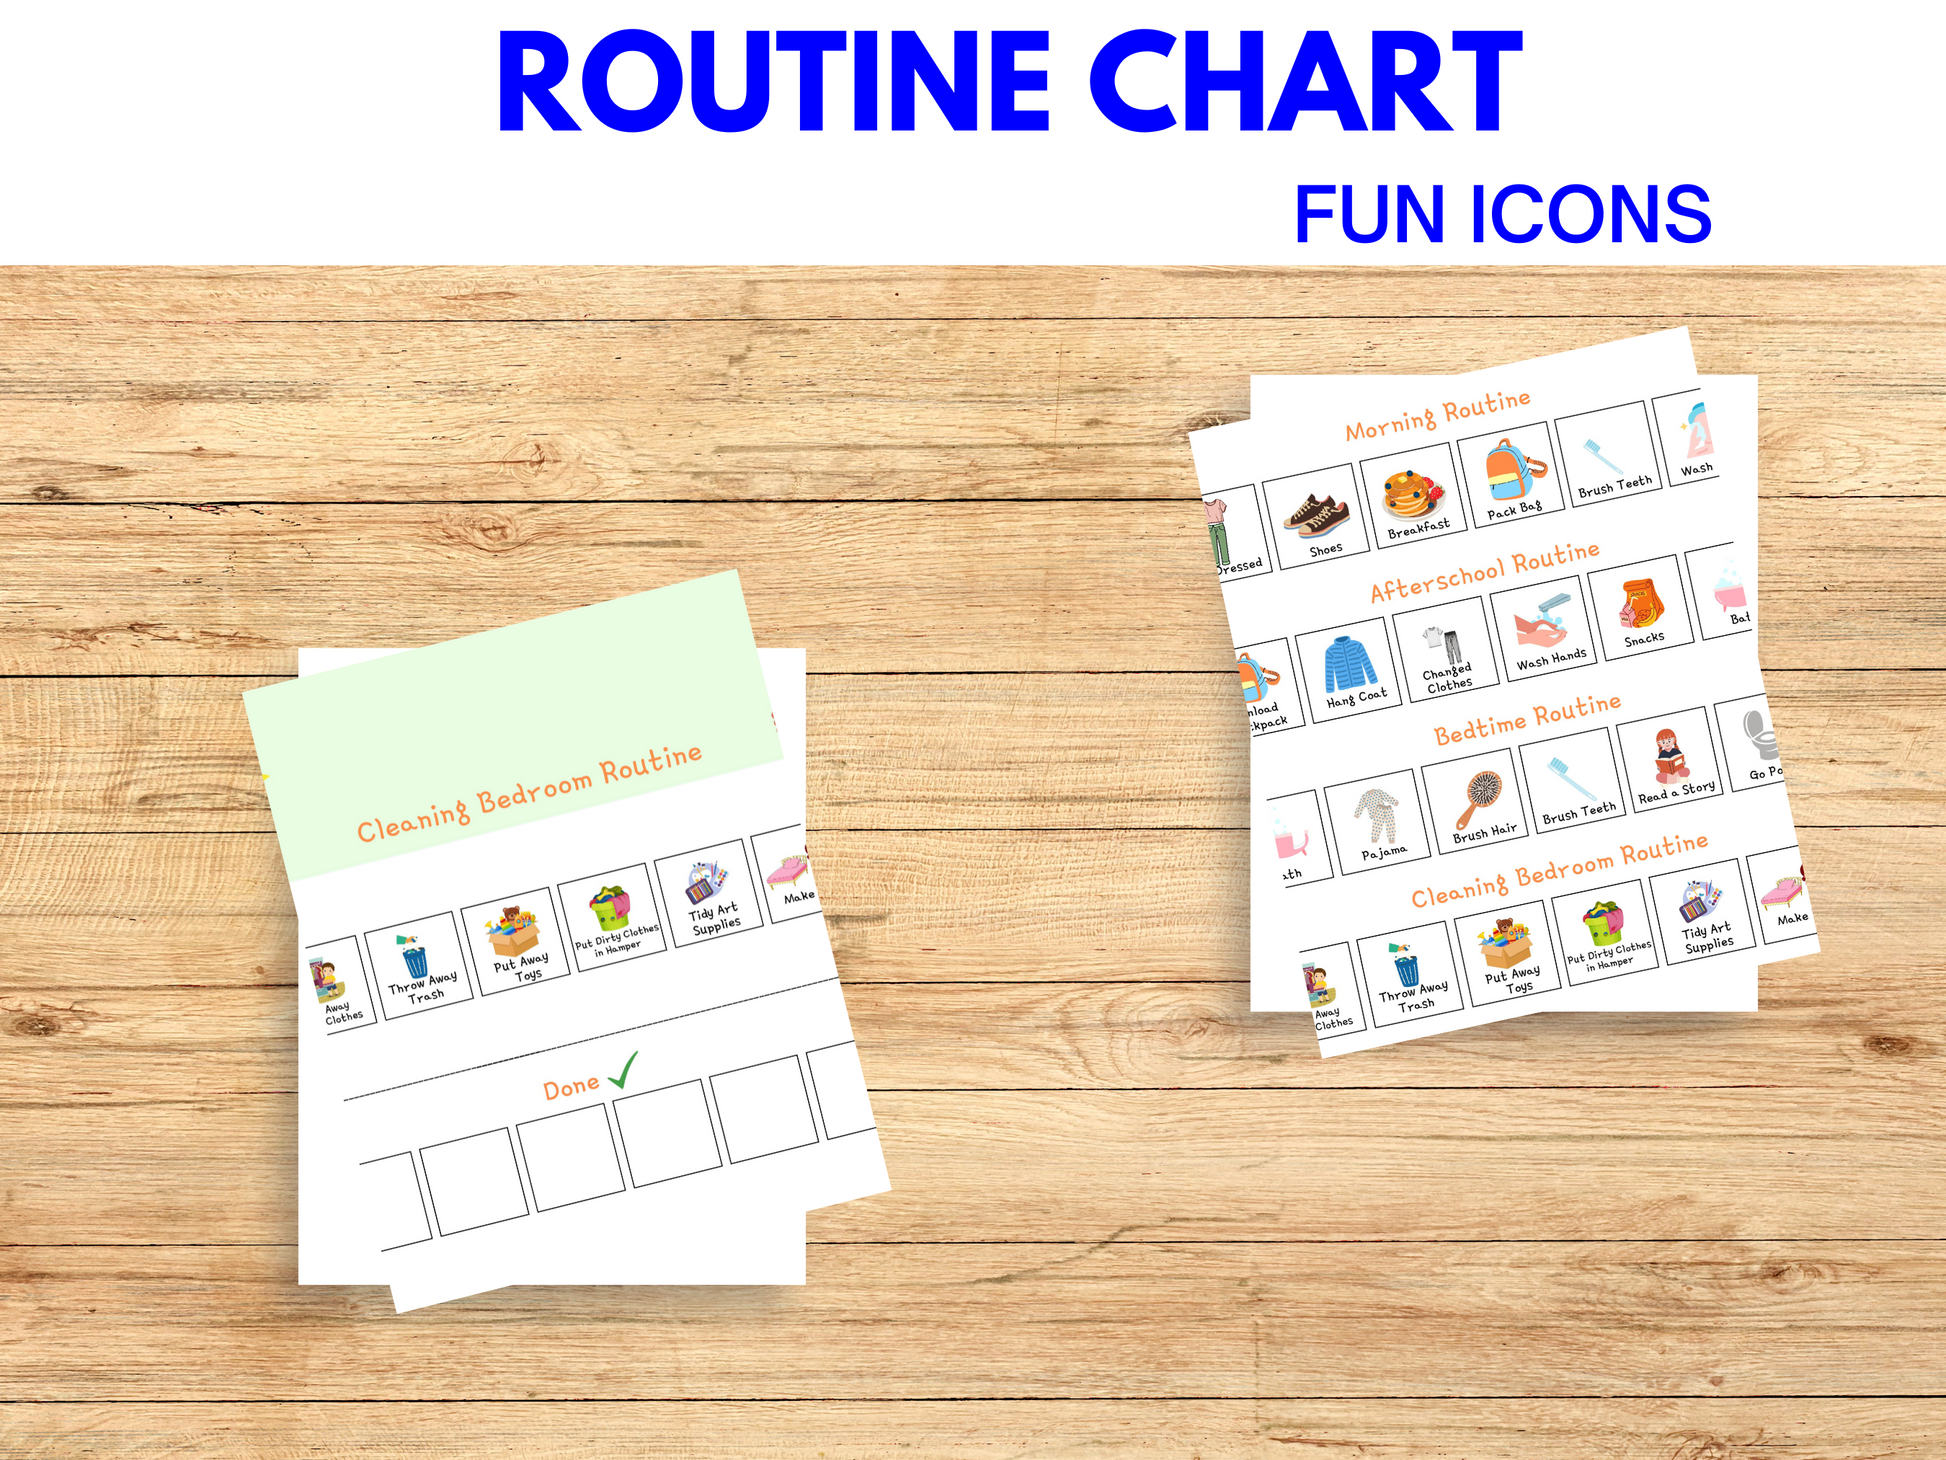 Cleaning bedroom routine chart and icons.